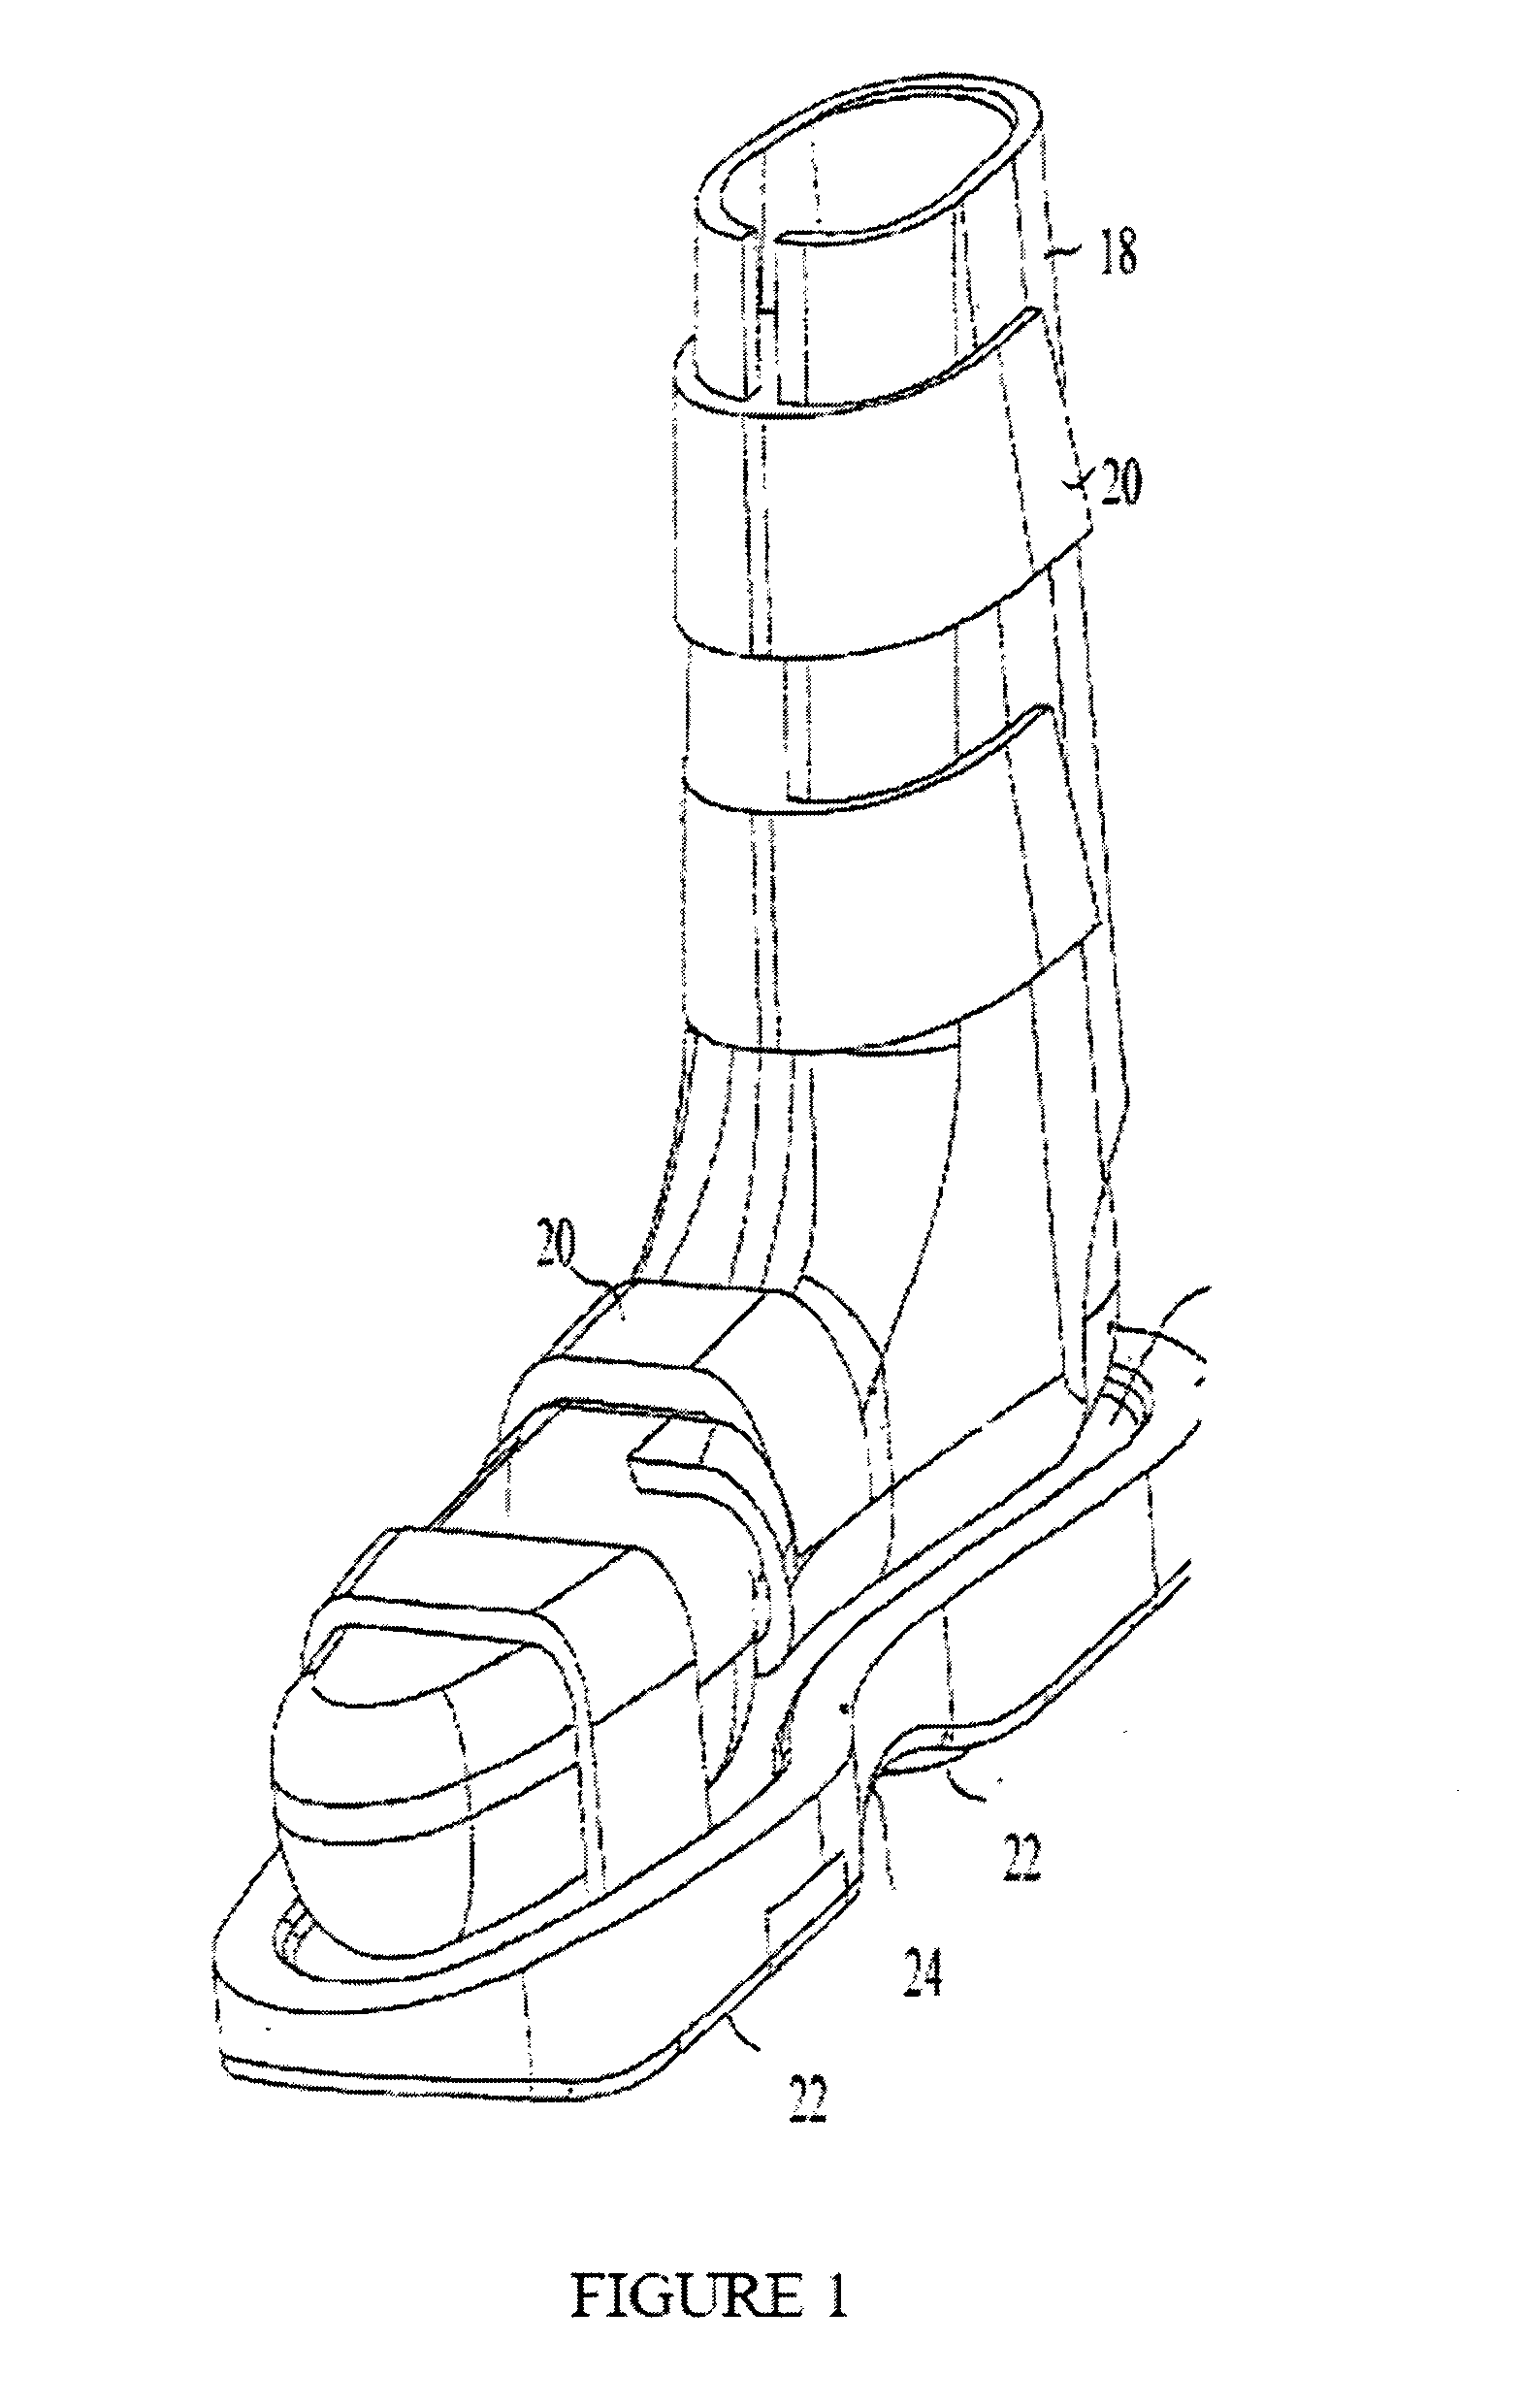 Method for treating urinary incontinence